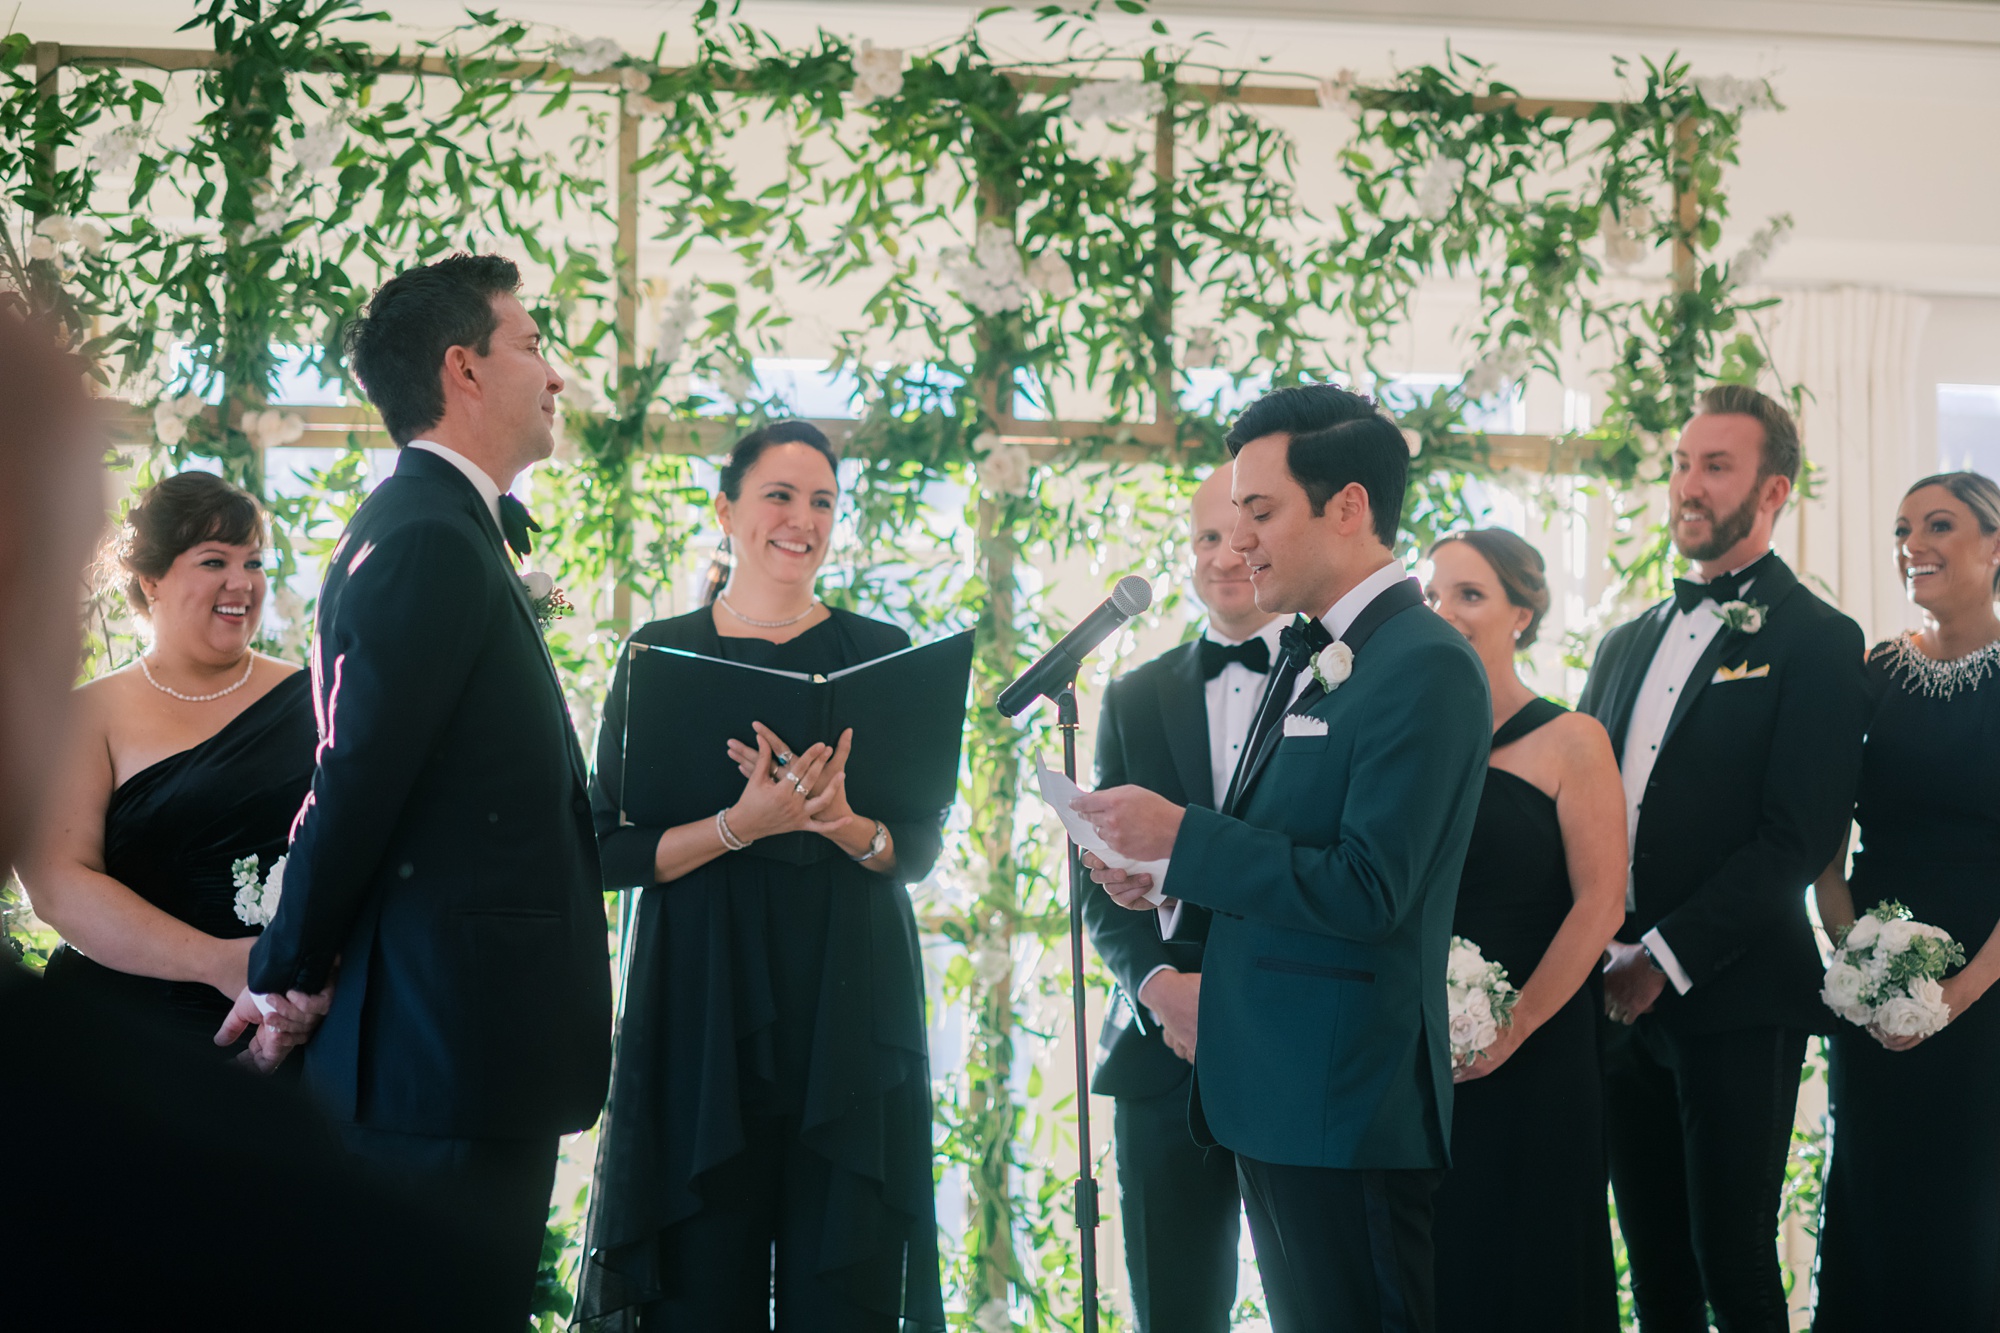 grooms exchange vows during ceremony inside the Hay Adams Hotel